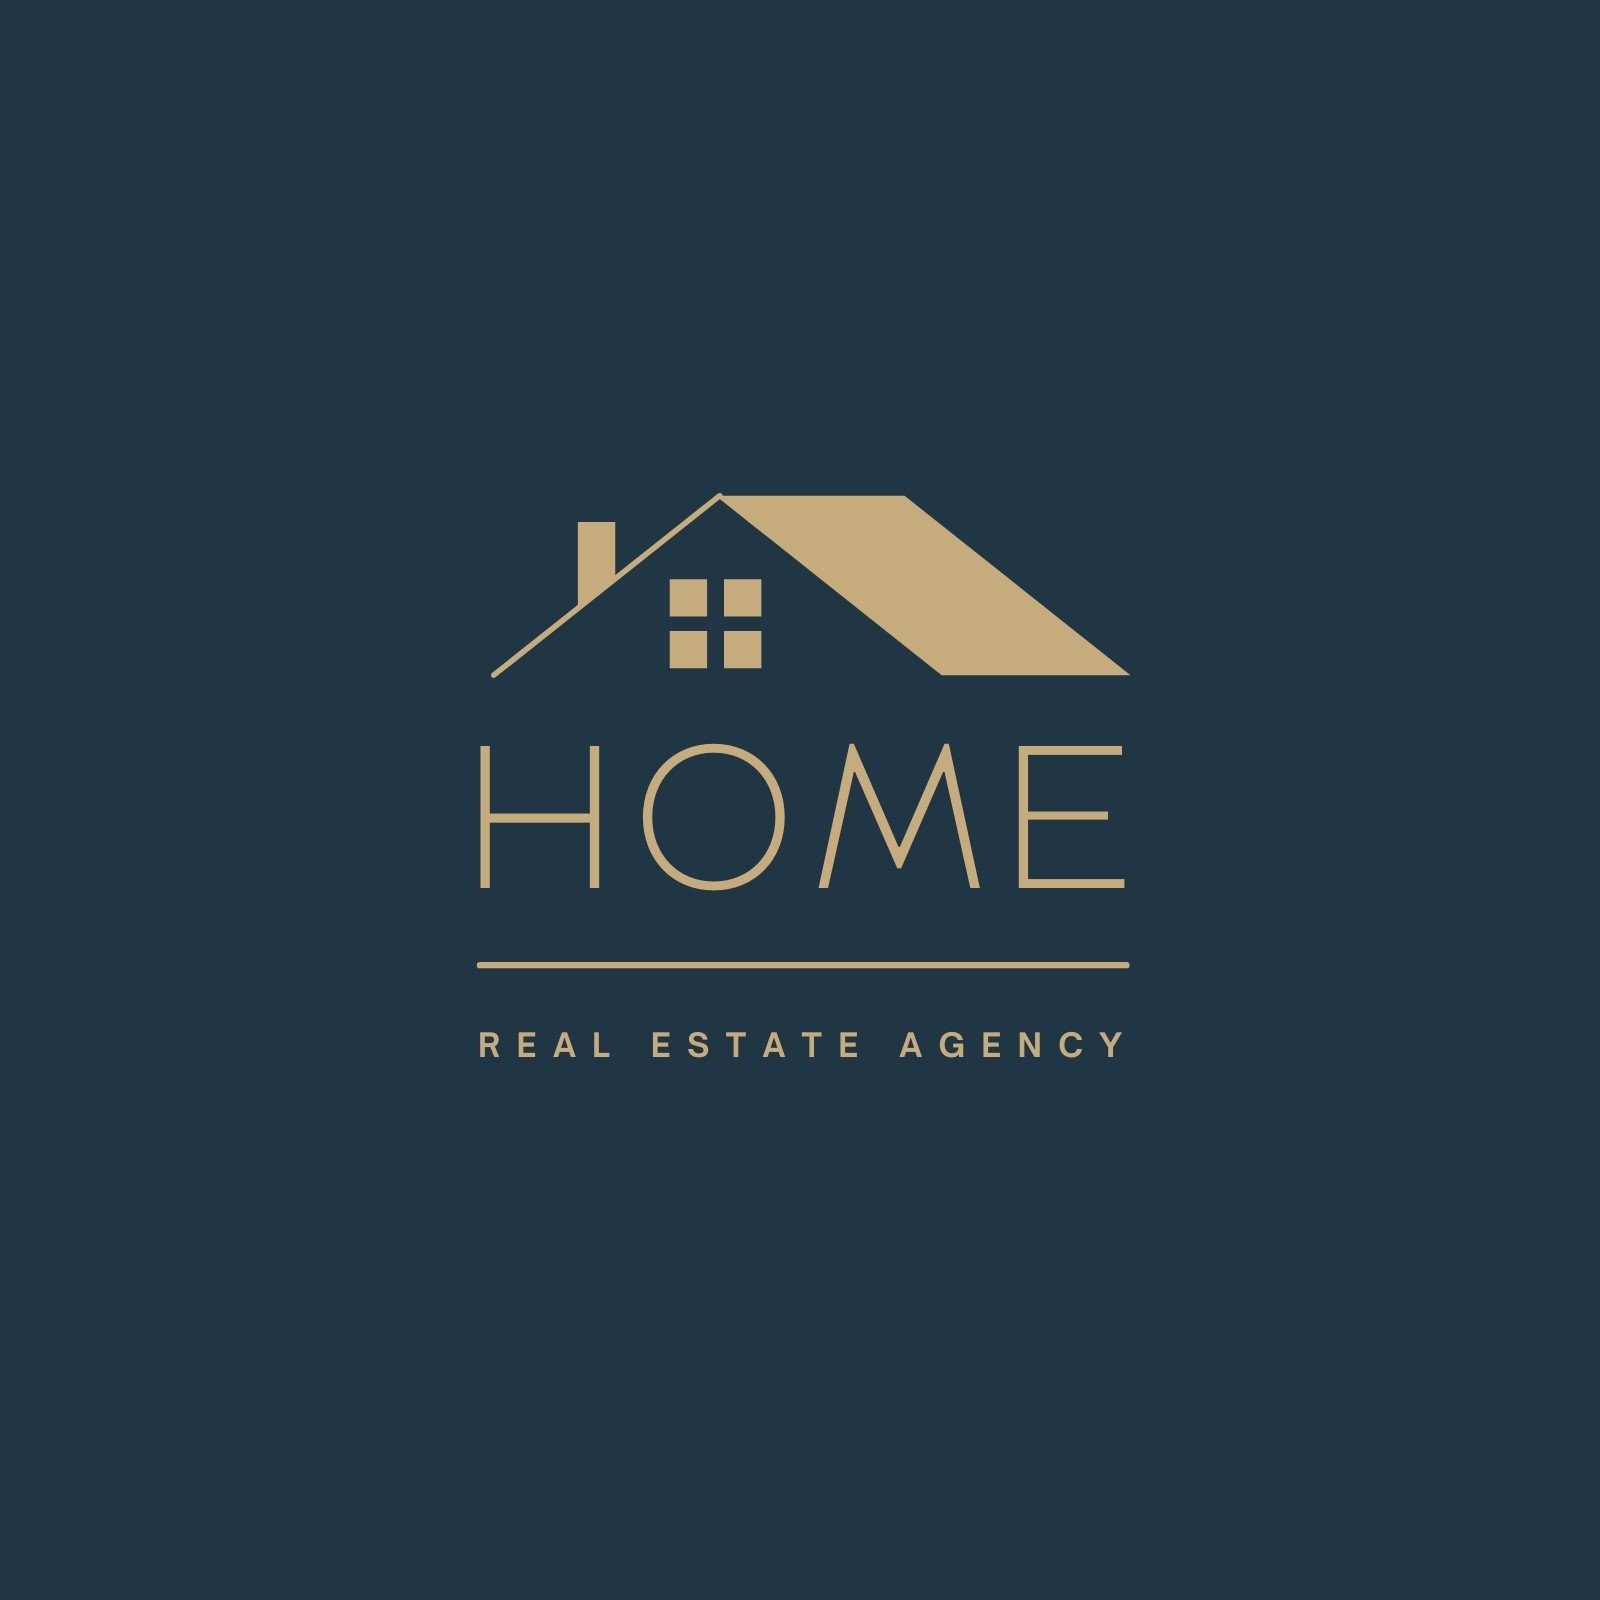 Free and customizable real estate logo templates | Canva